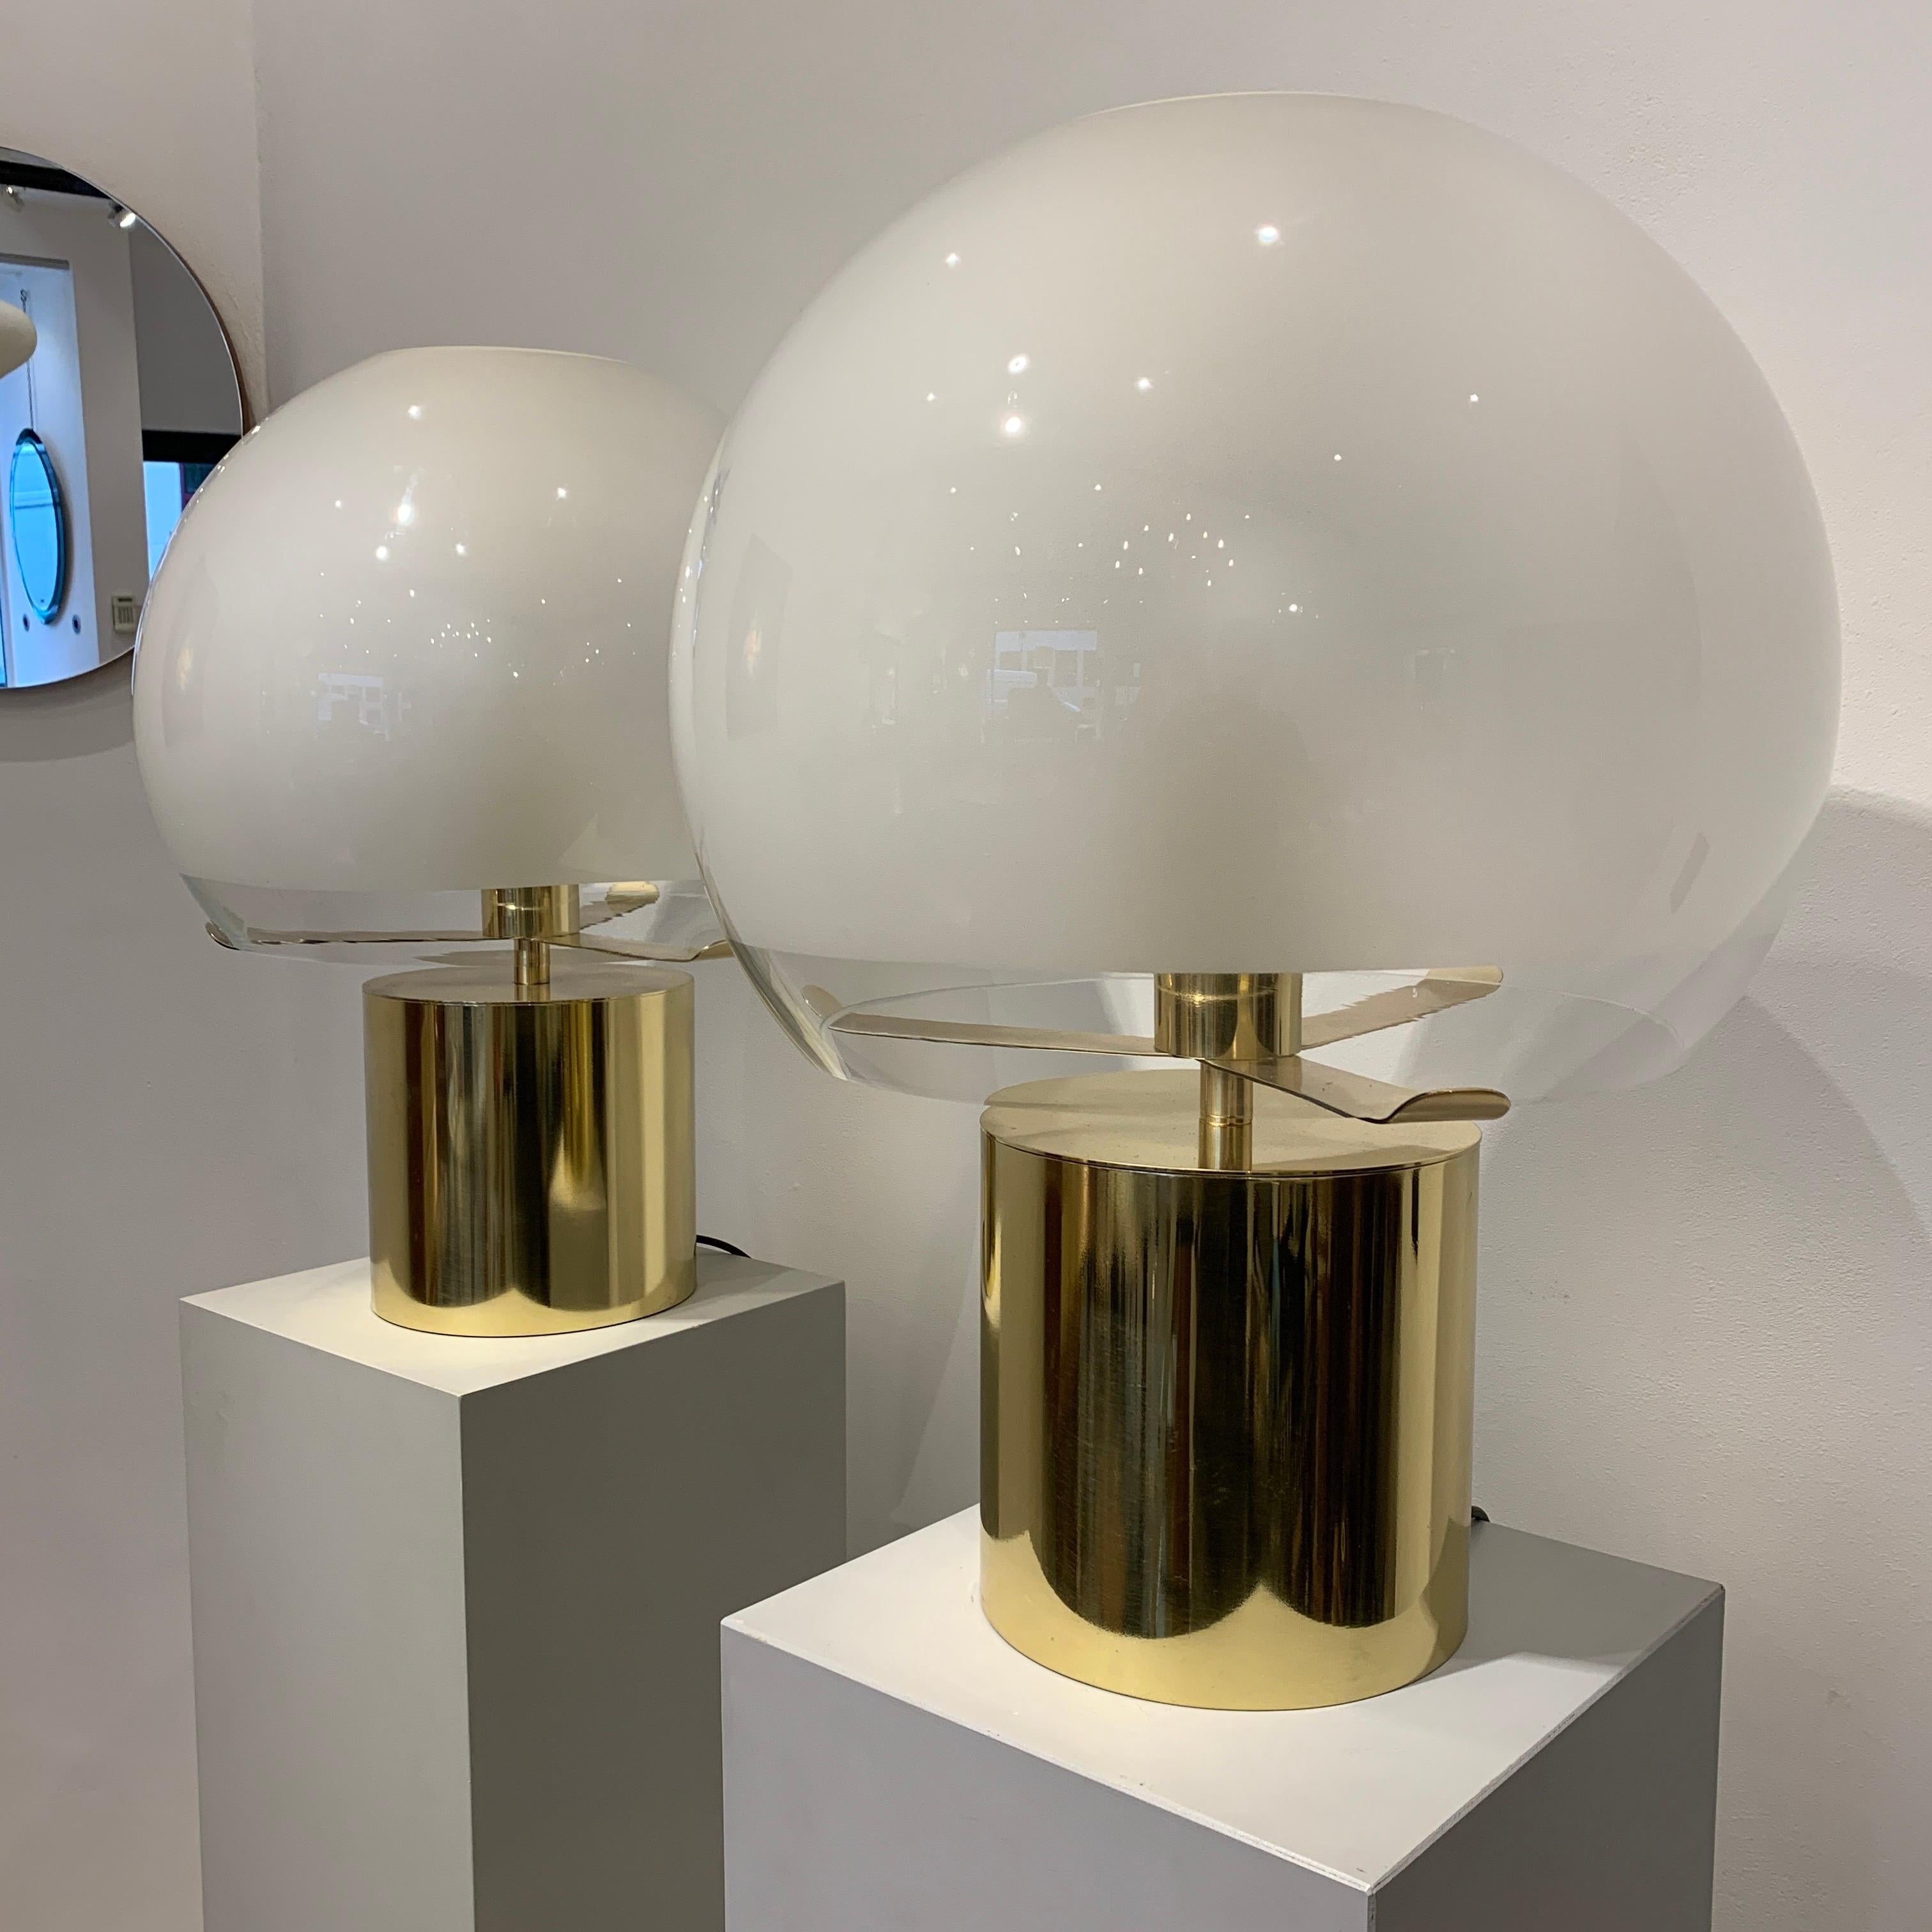 The Porcino lamp was created in 1967 by Luigi Caccia Dominioni and edited by Azucena. The present pair is in brass with their original glass diffusers. There are three lamps under the diffuser and one at the top. Please note that the lamps are in